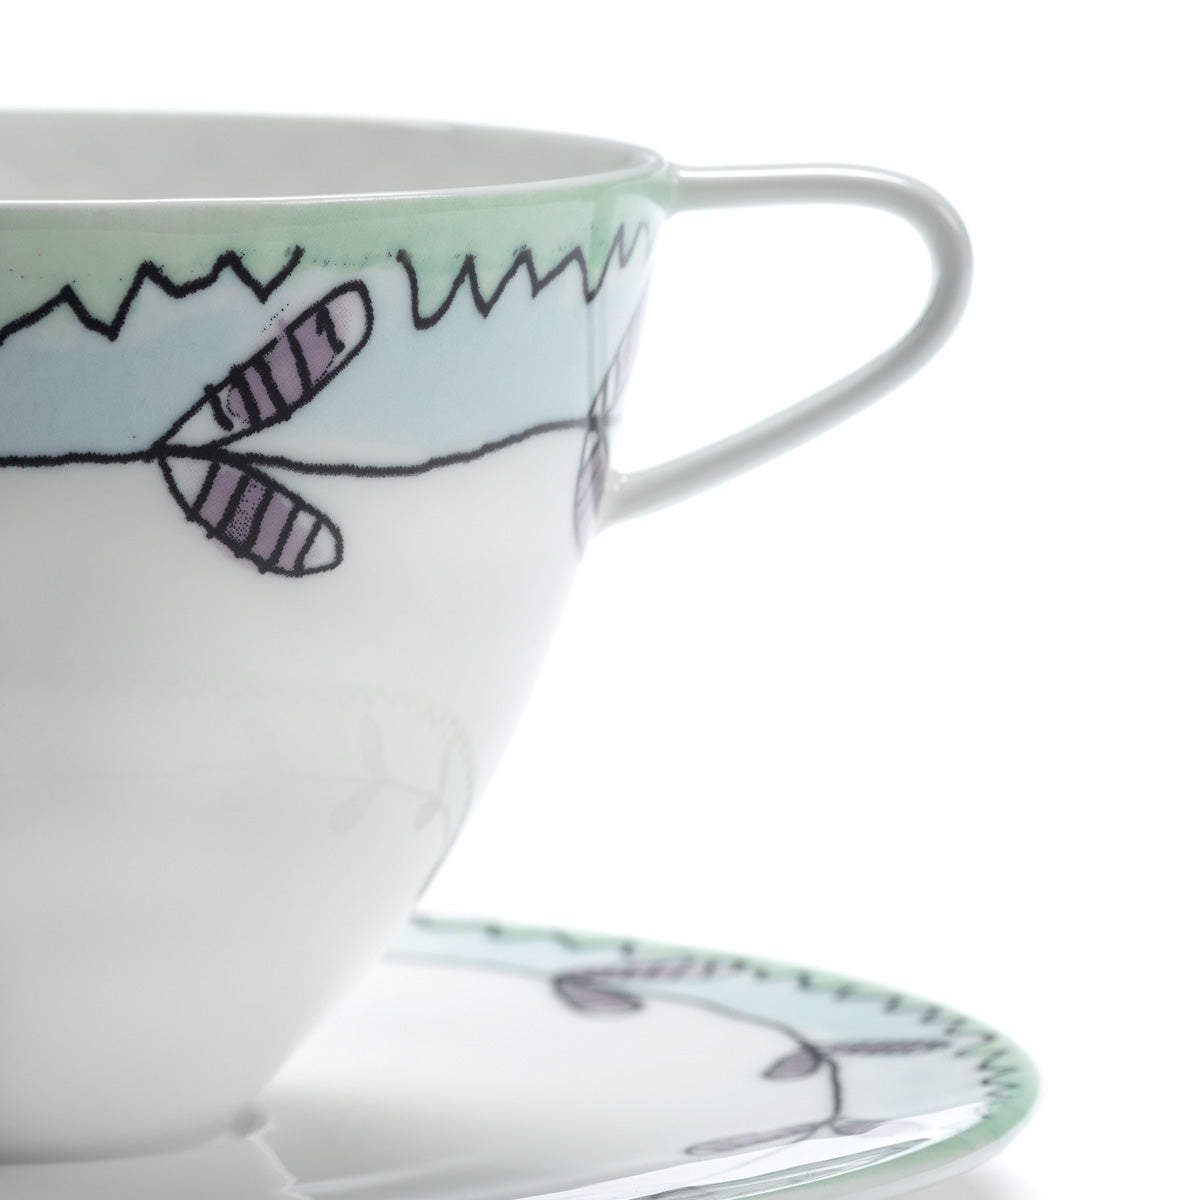 Marni X Serax Blossom Milk Cappuccino Cup with Saucer